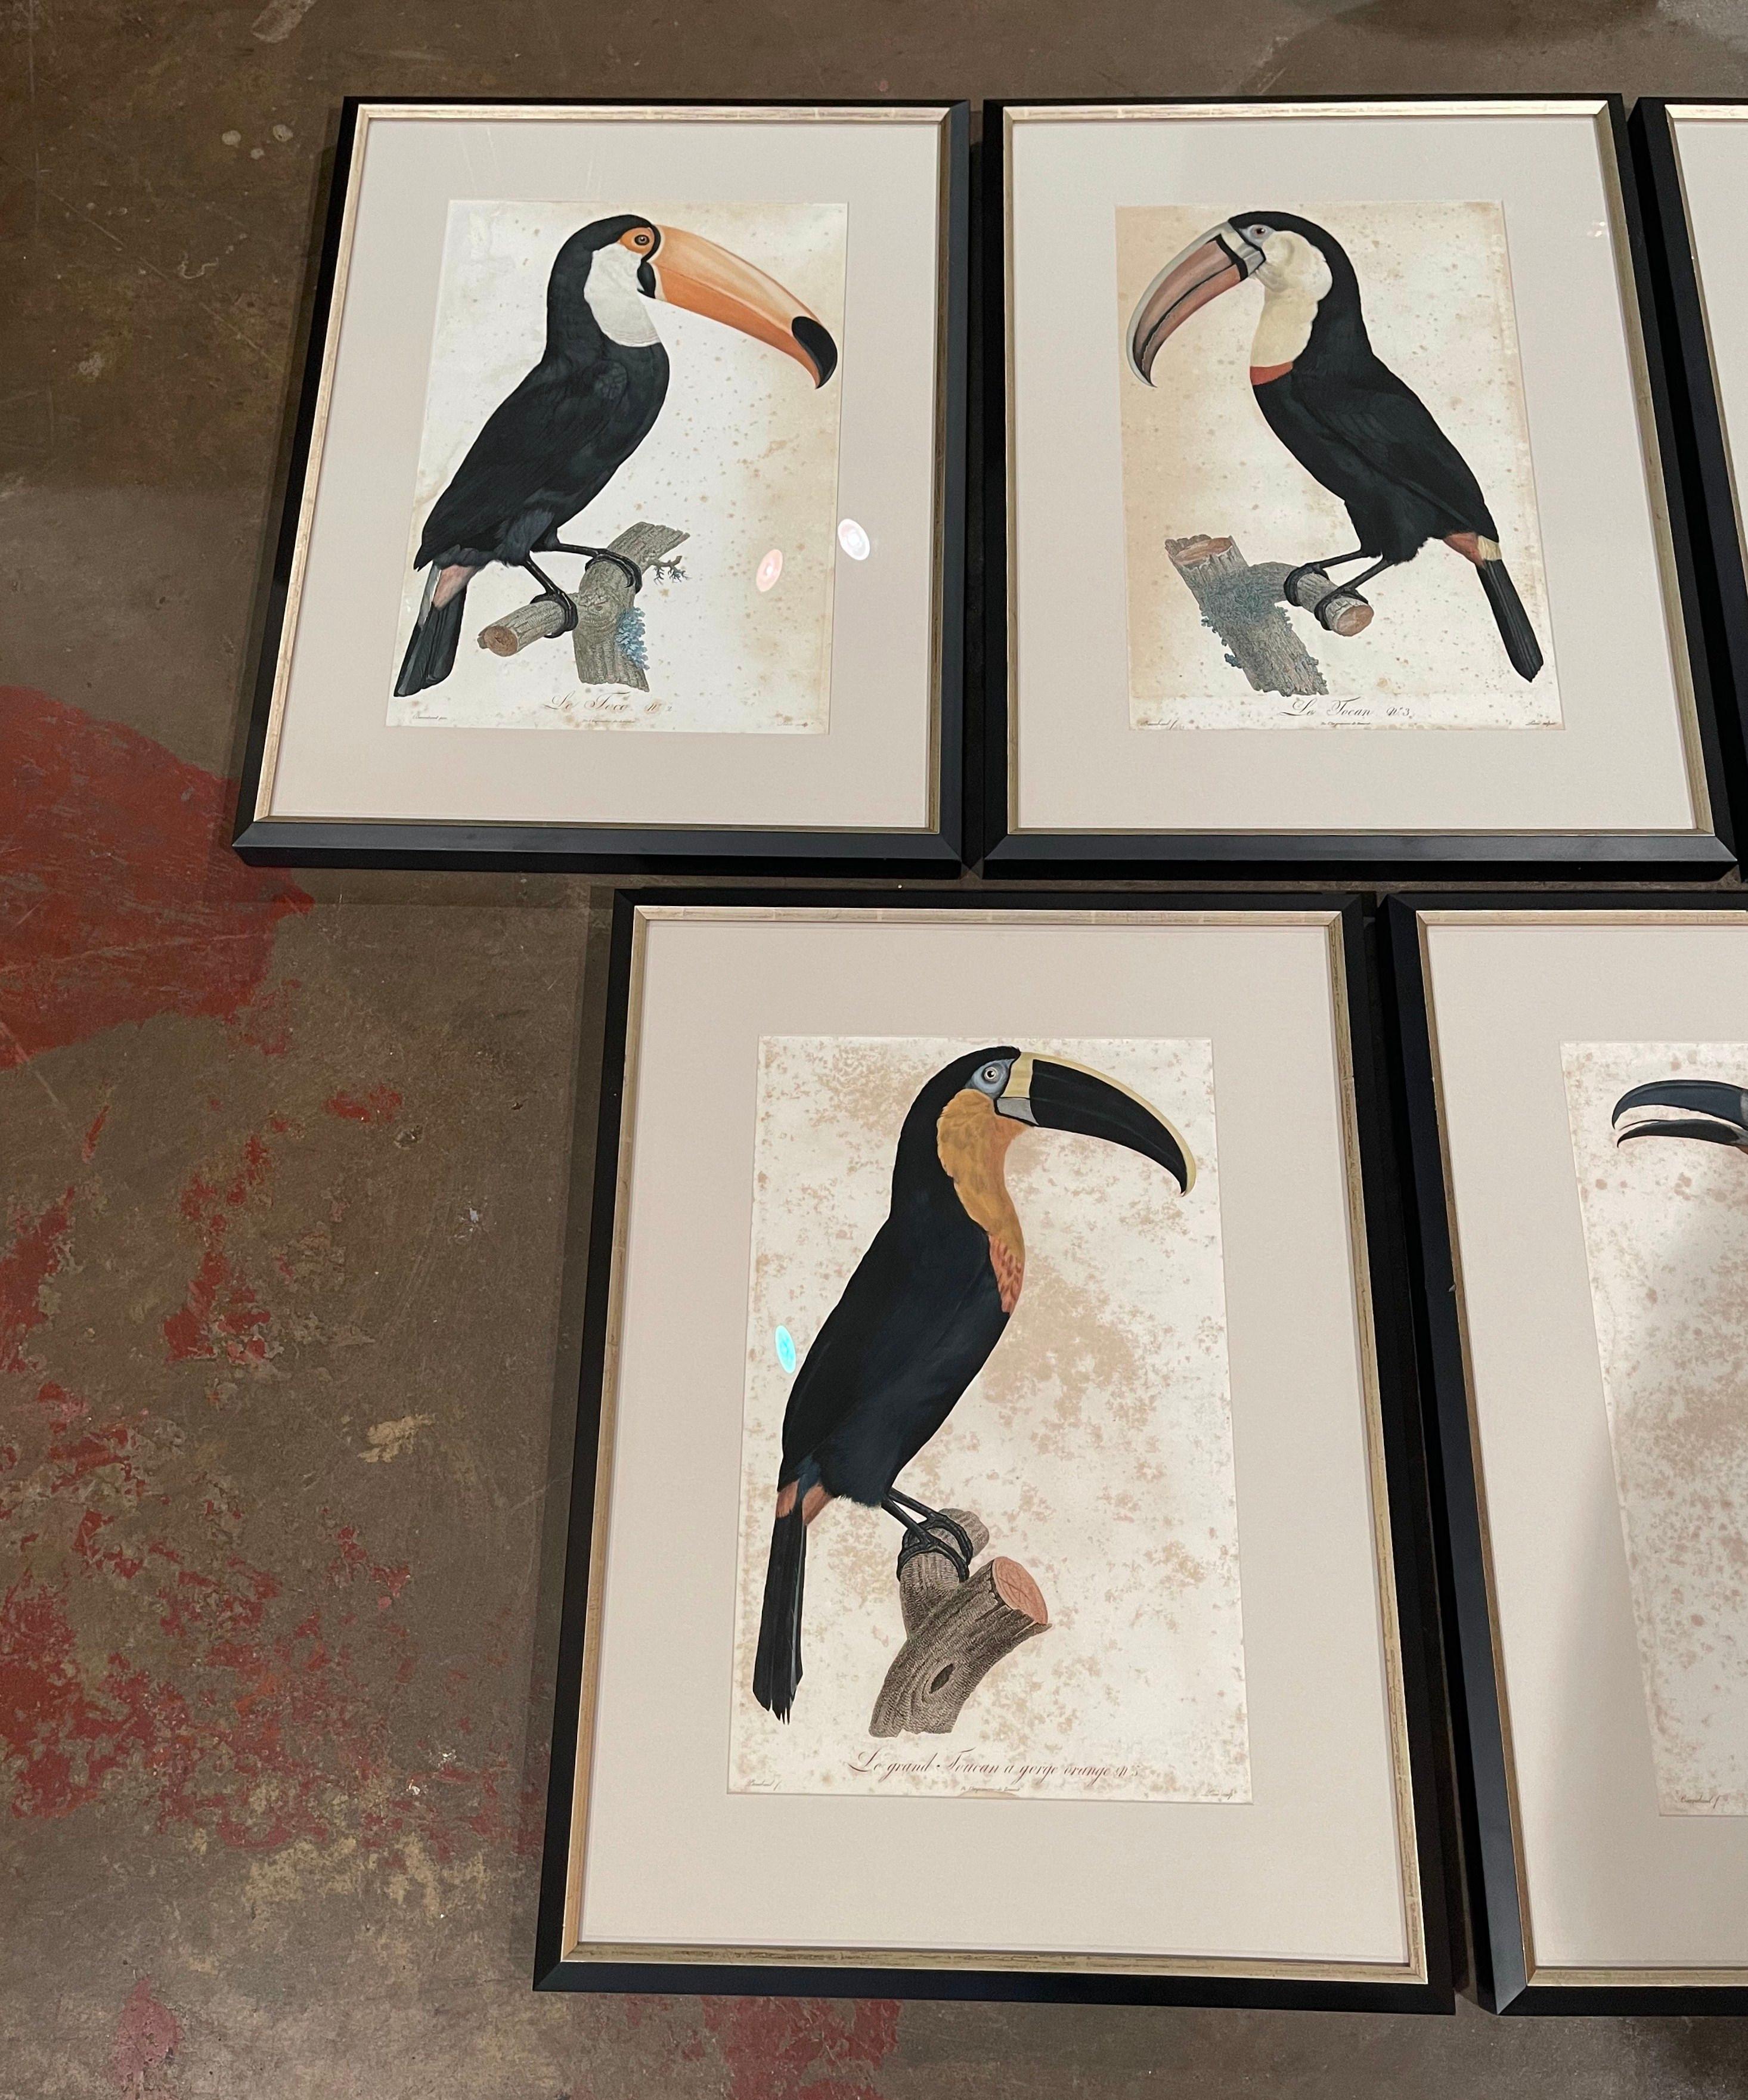 Decorate a study or office this colorful suite of antique toucan etchings by Jacques Barraband. Created in France circa 1801-1804, each drawing depicts a parrot resting on a branch.
Titled 